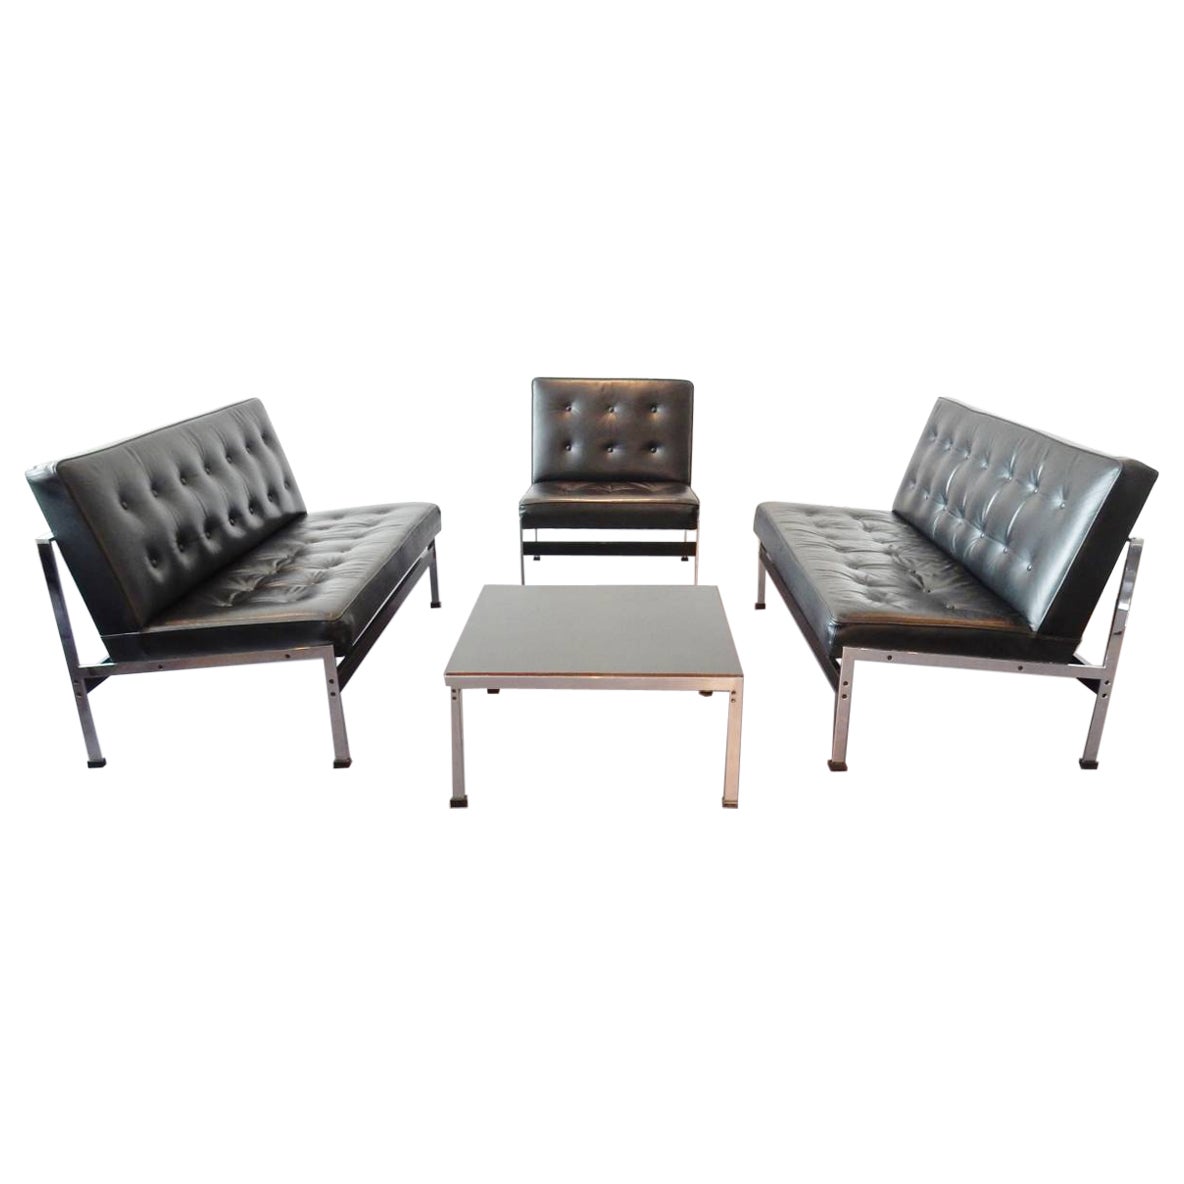 Rare '020 Series' seating group by Kho Liang Ie for Artifort, Netherlands, 1958 For Sale